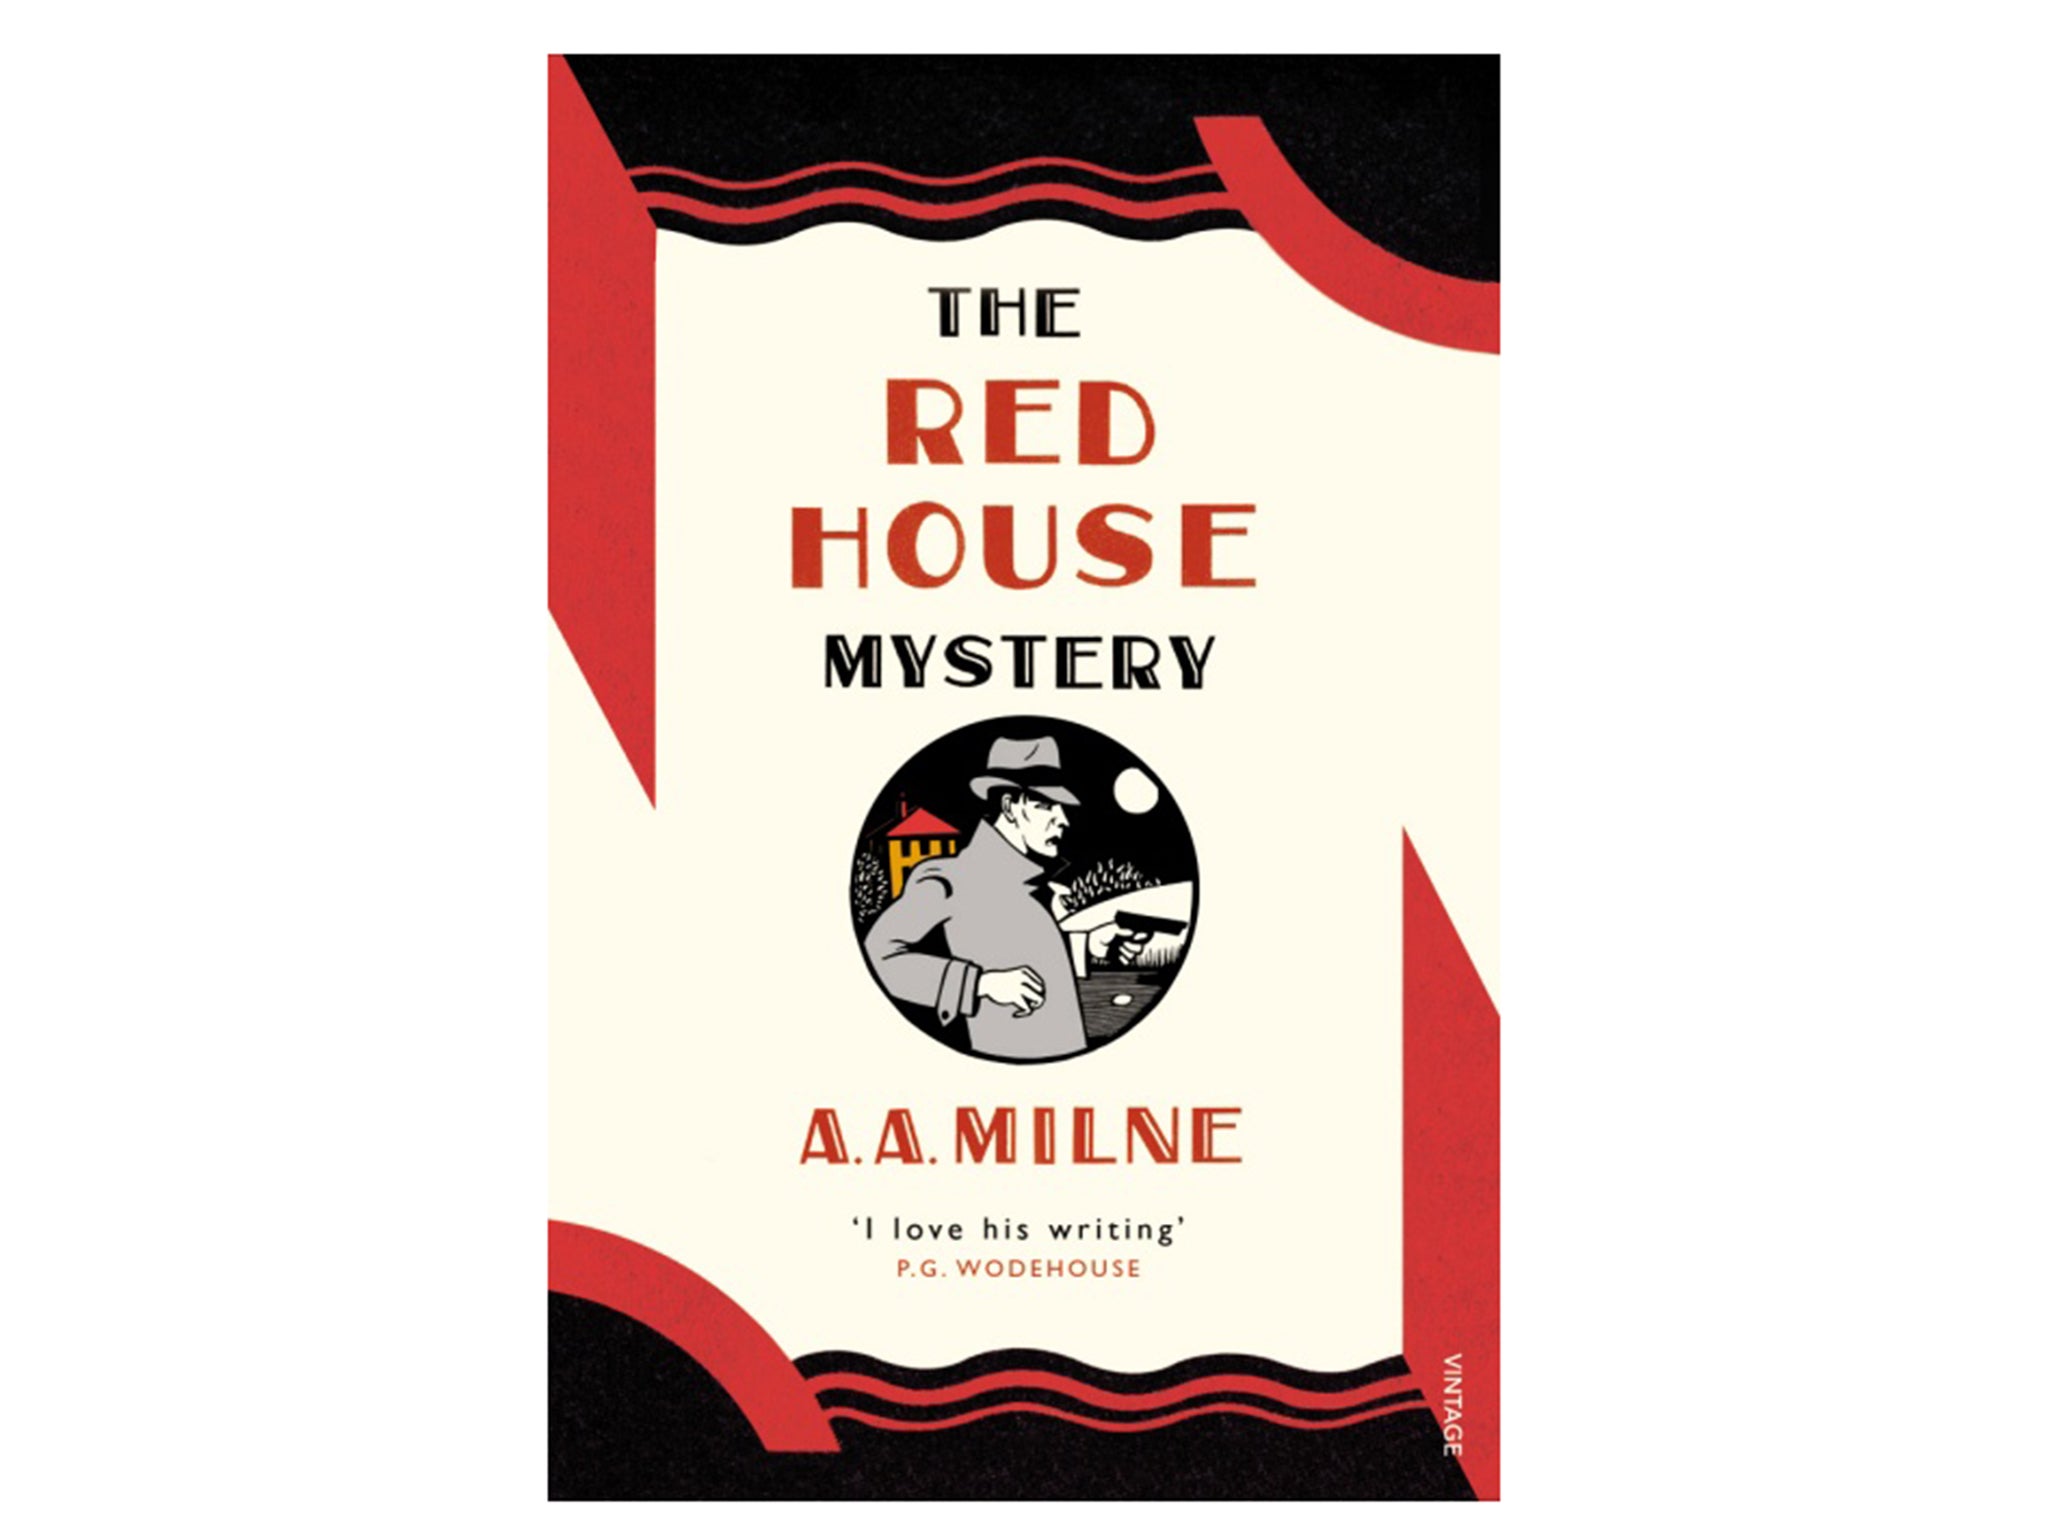 the-red-house-mystery-a-a-milne-indybest-birthday.jpg